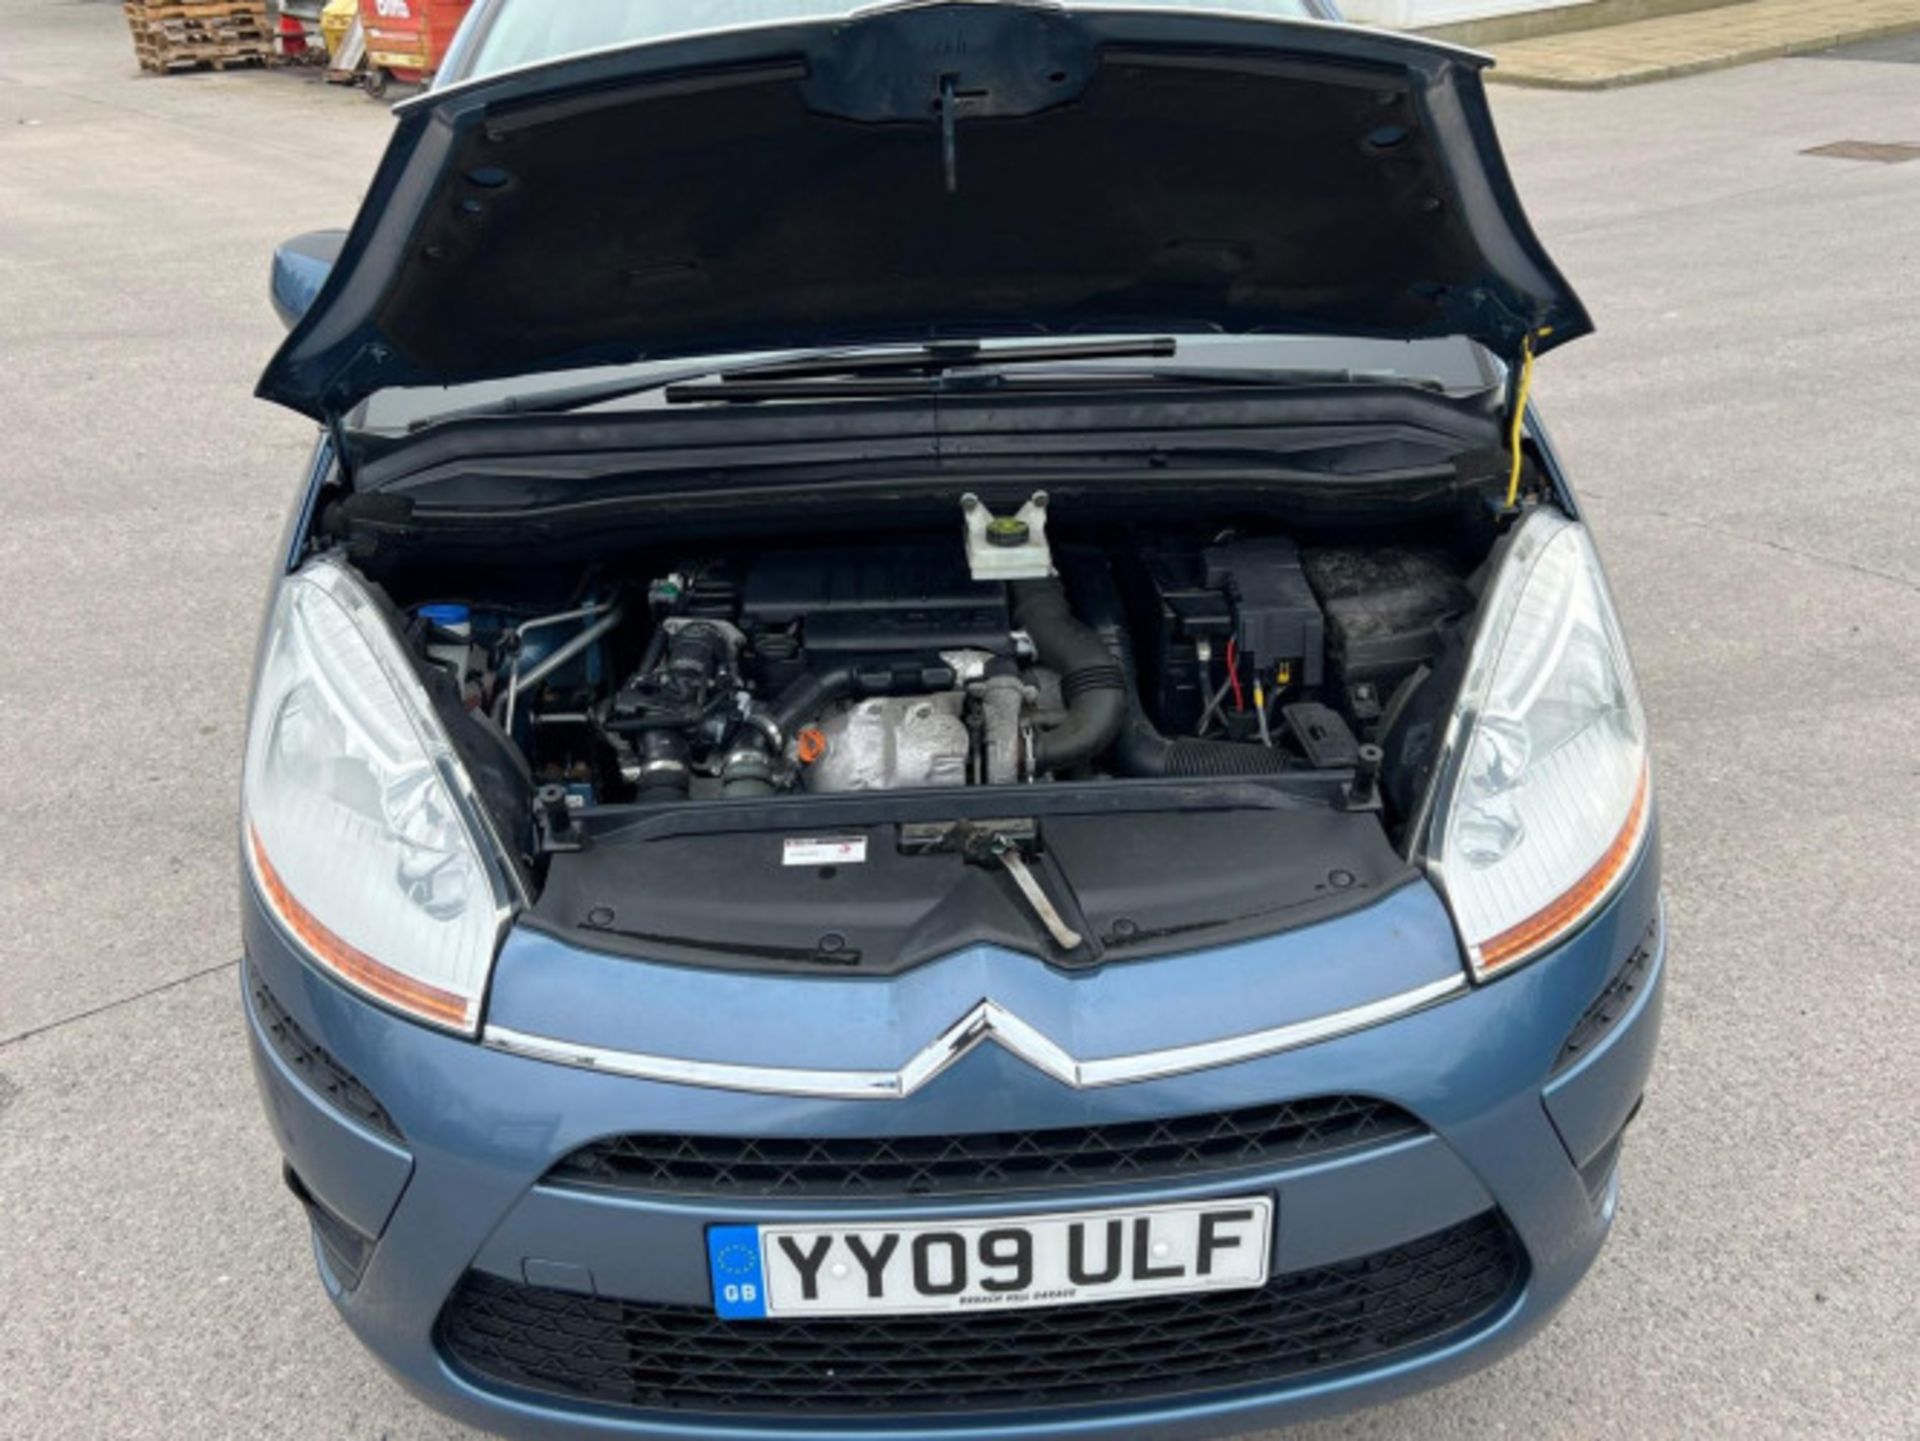 2009 CITROEN C4 PICASSO 1.6 HDI VTR+ EGS6 5DR >>--NO VAT ON HAMMER--<< - Image 123 of 123